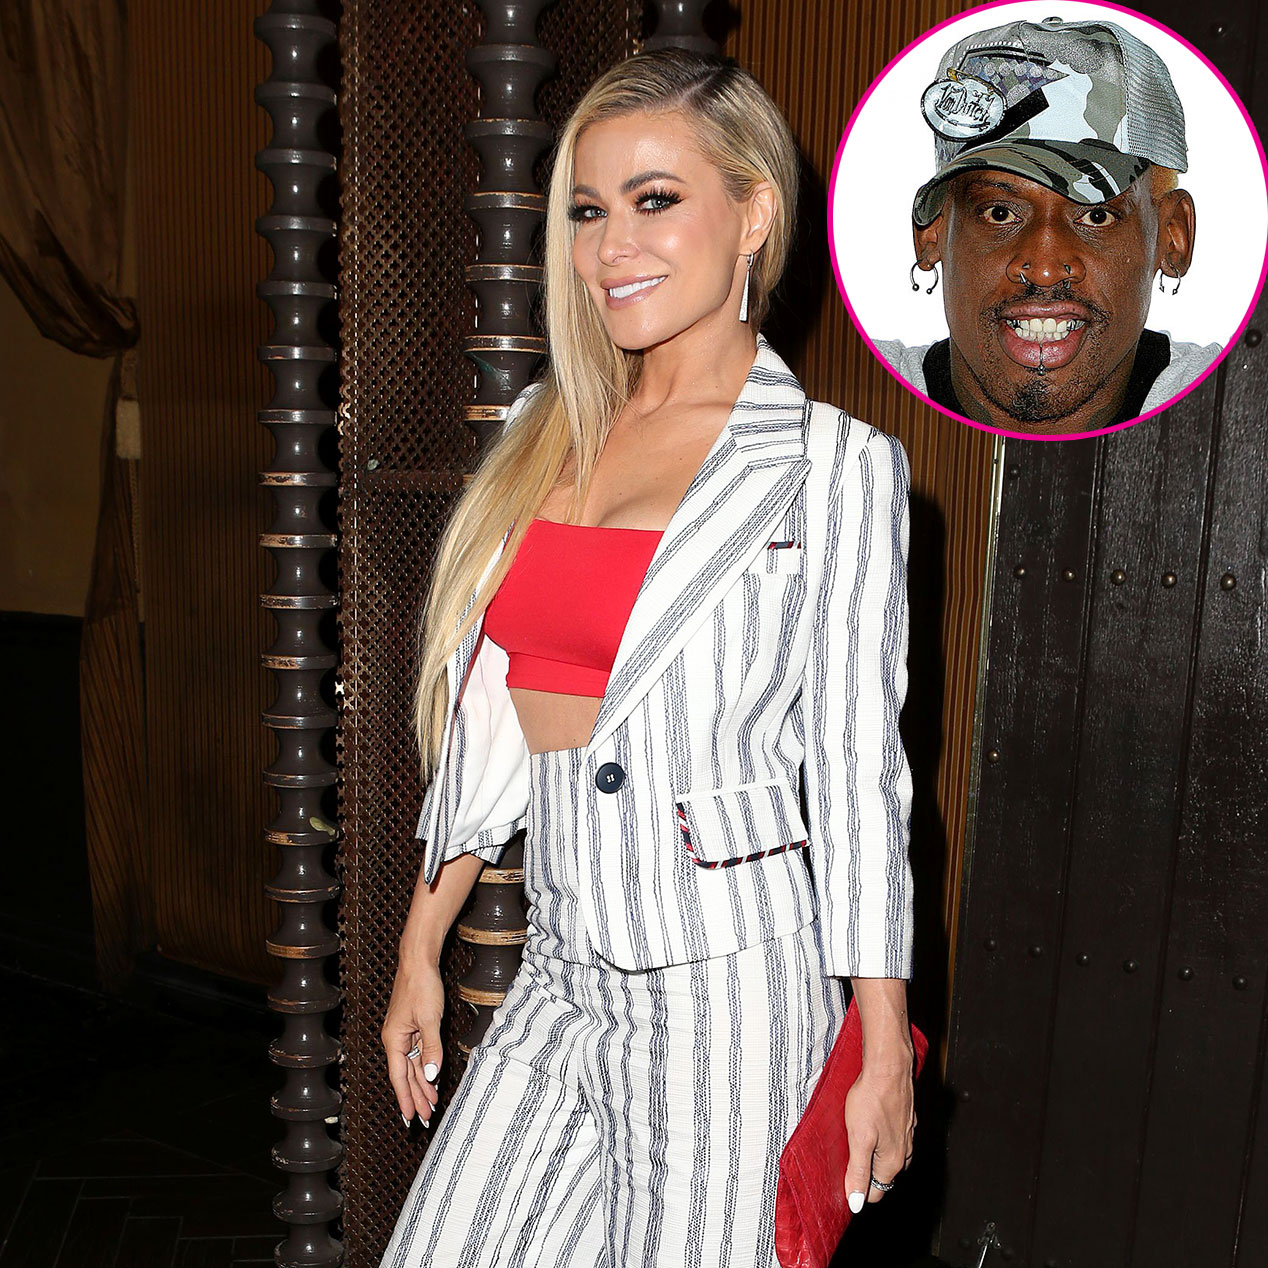 Carmen Electra Admits She and Dennis Rodman Had Sex All Over Chicago Bulls Practice Facility Love Island